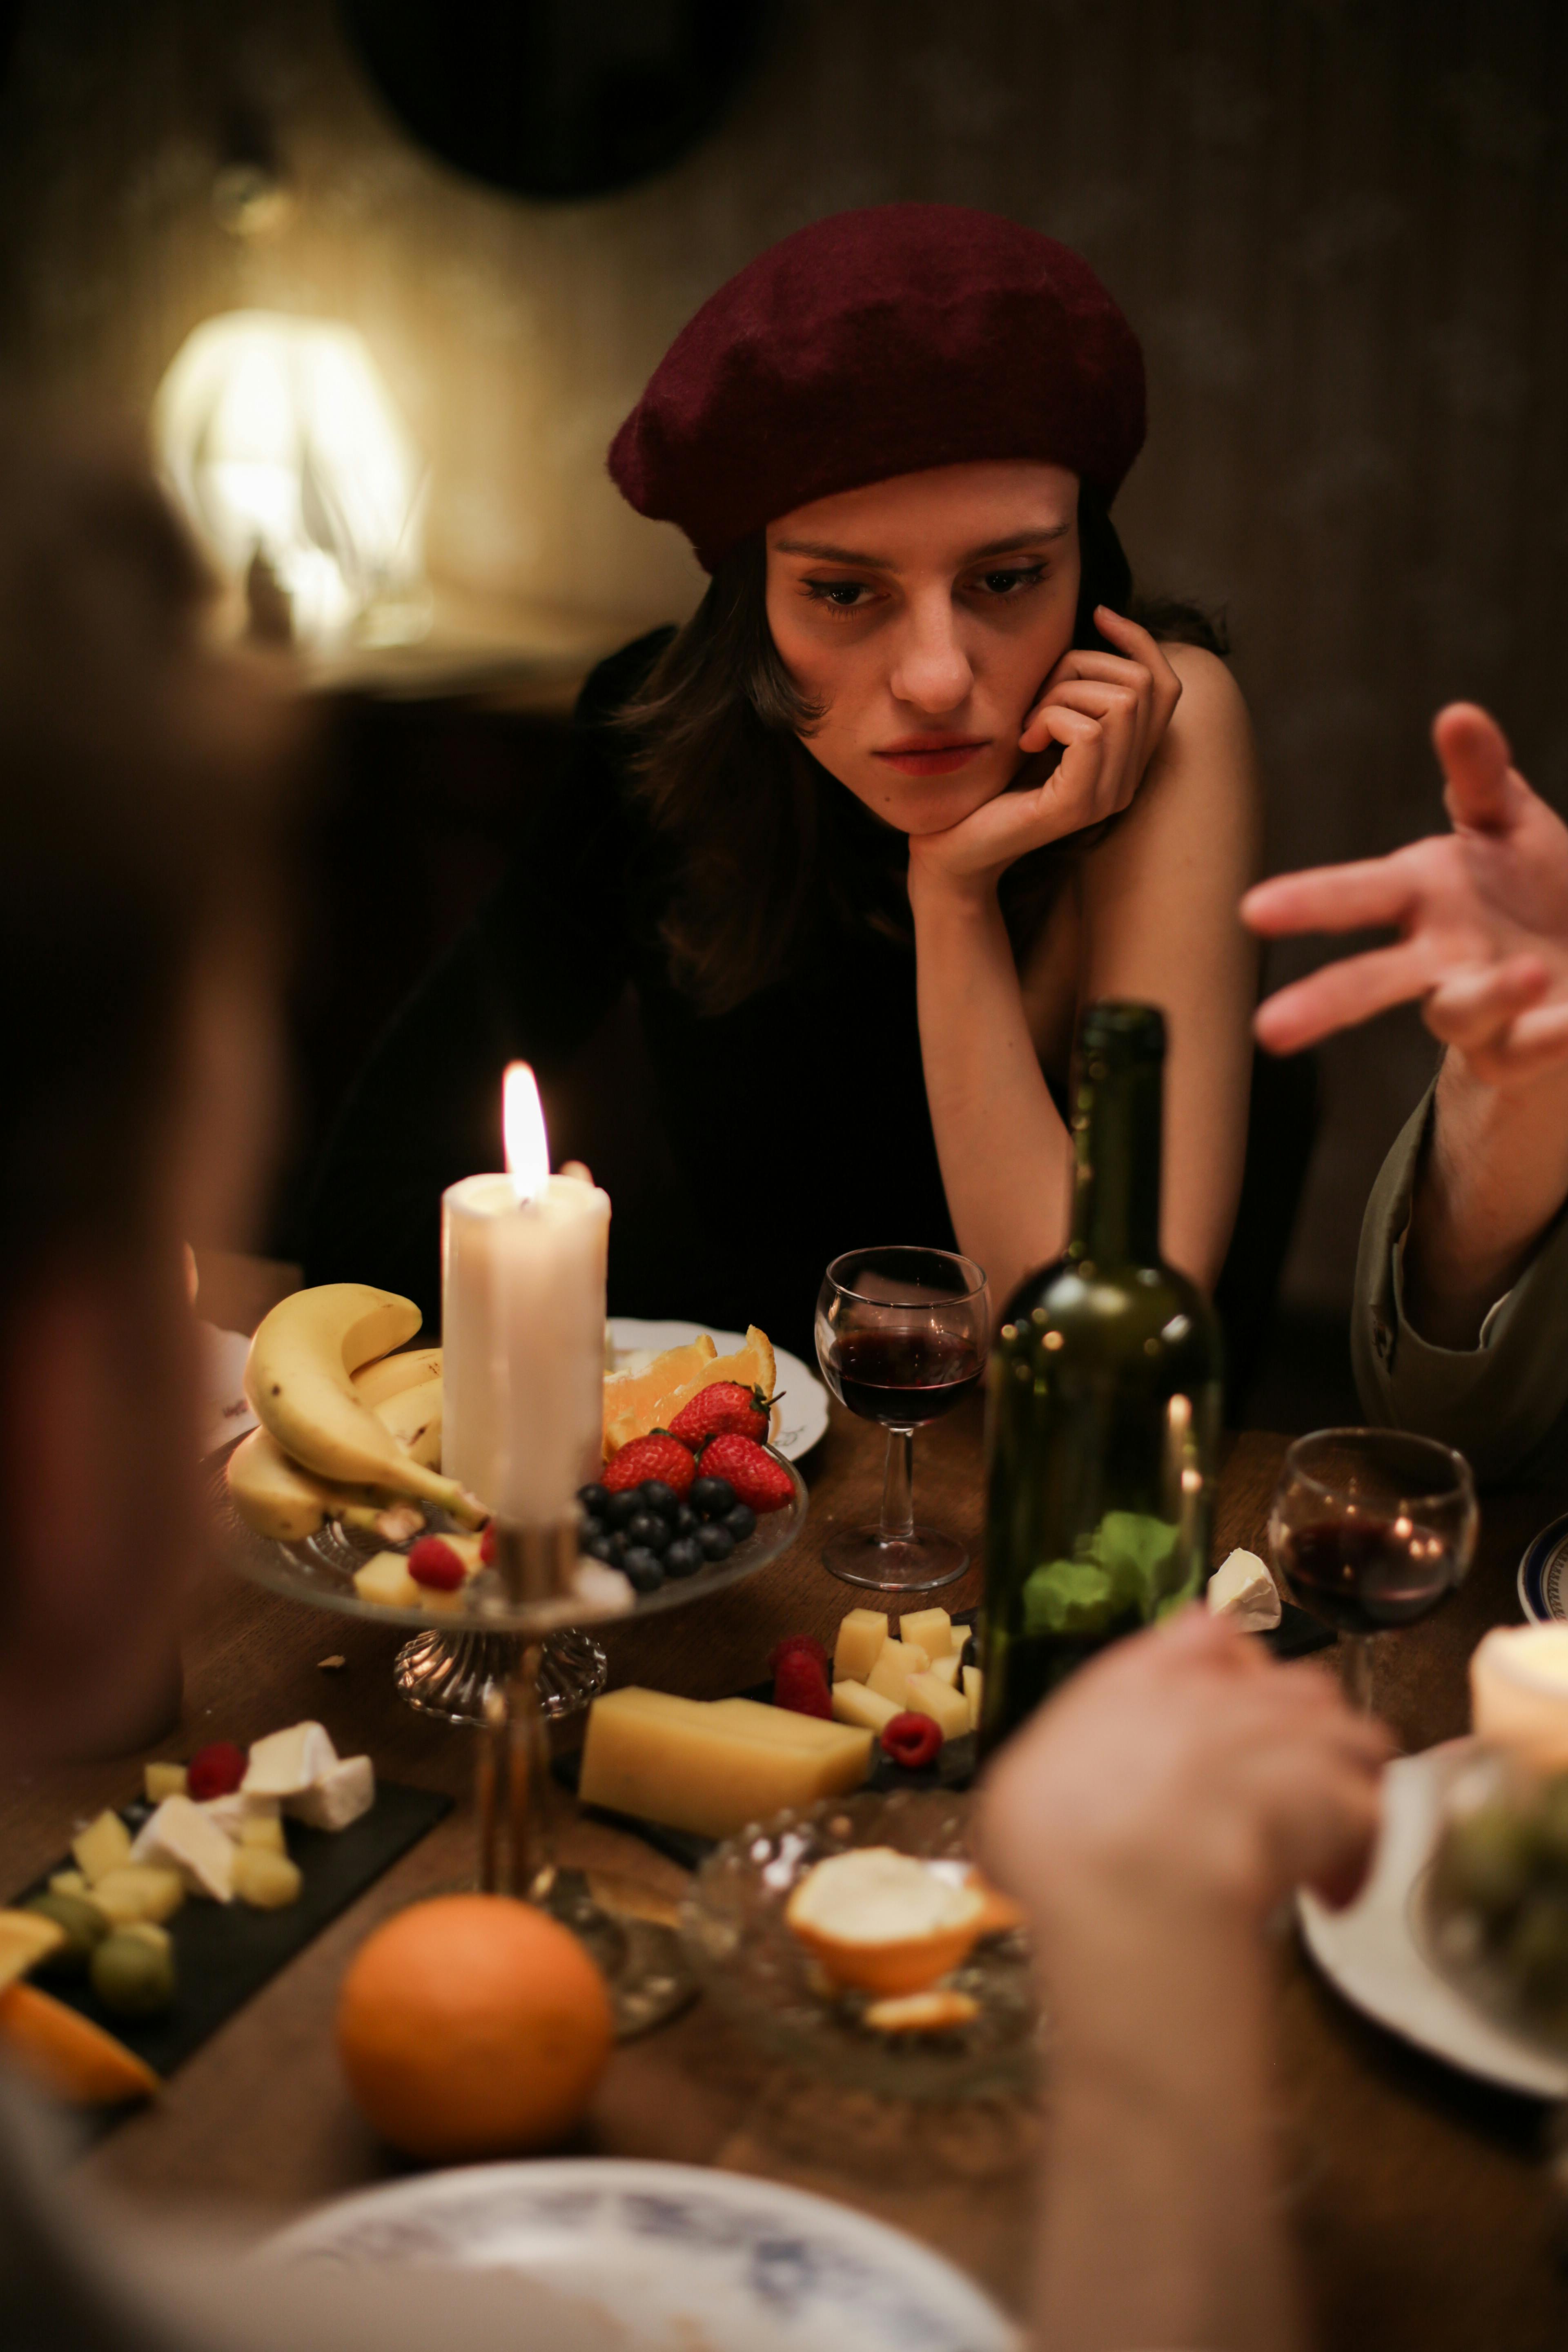 A woman expressing unhappiness at the dinner table | Source: Pexels